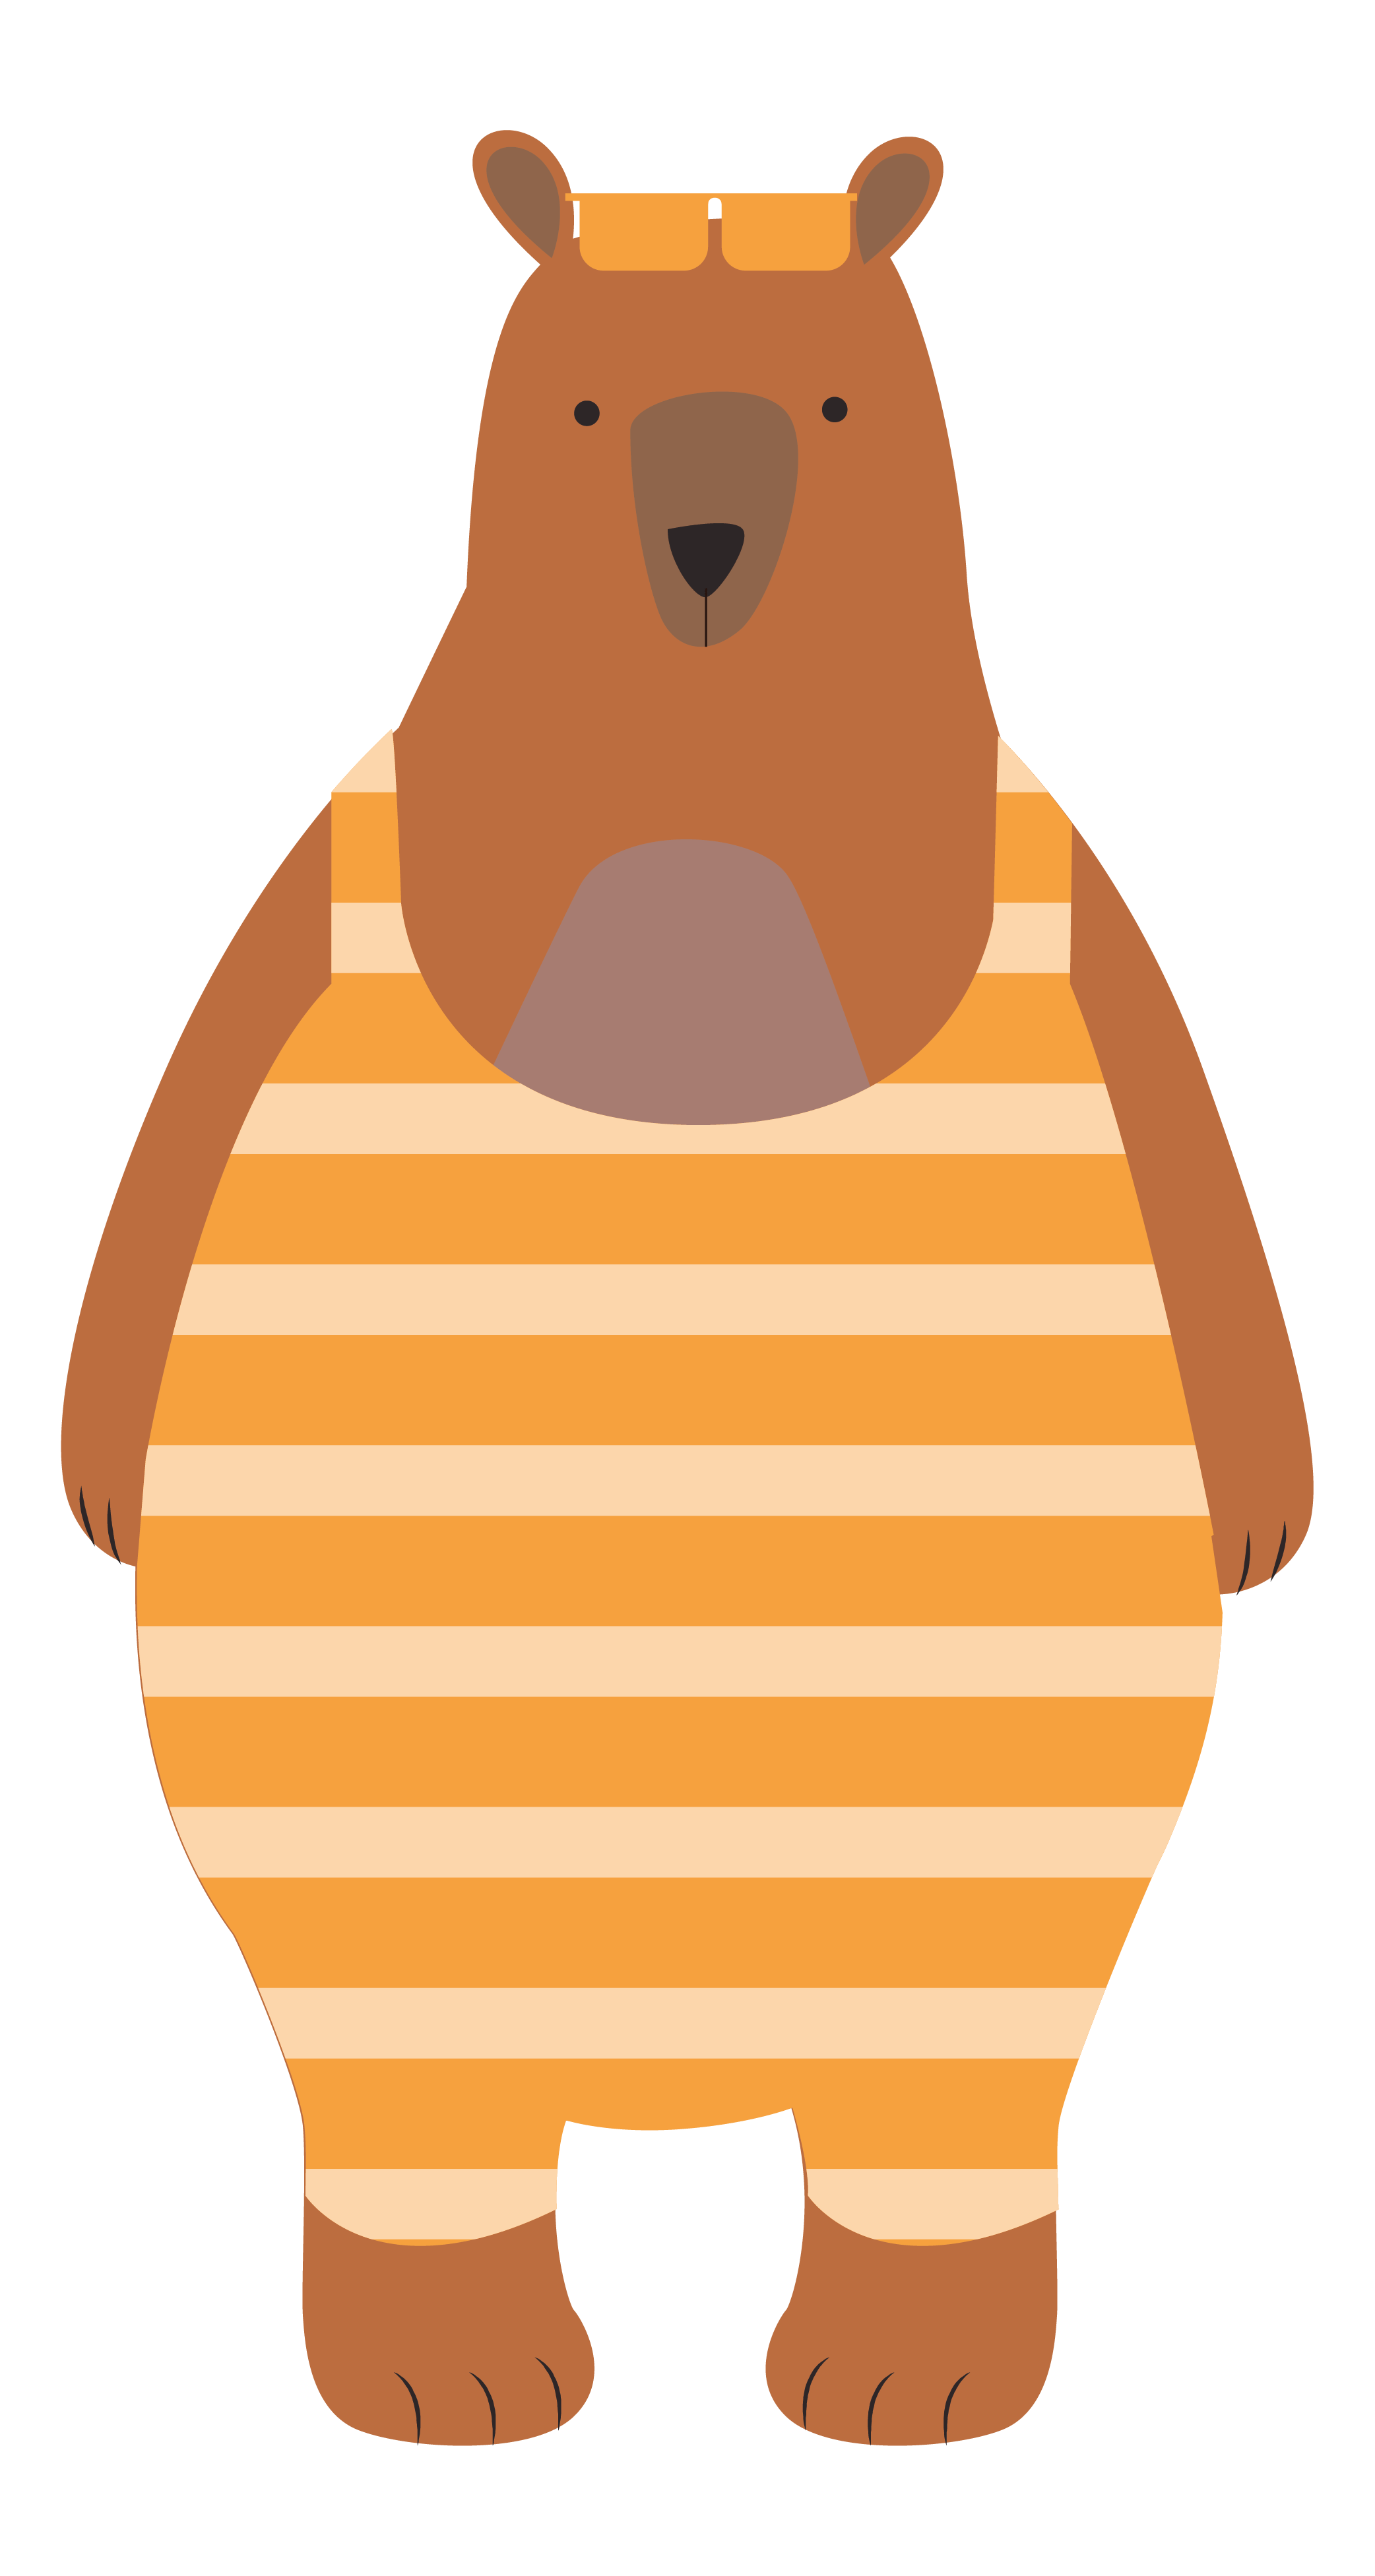 An illustrated bear standing up wearing a striped yellow swimsuit and sunglasses